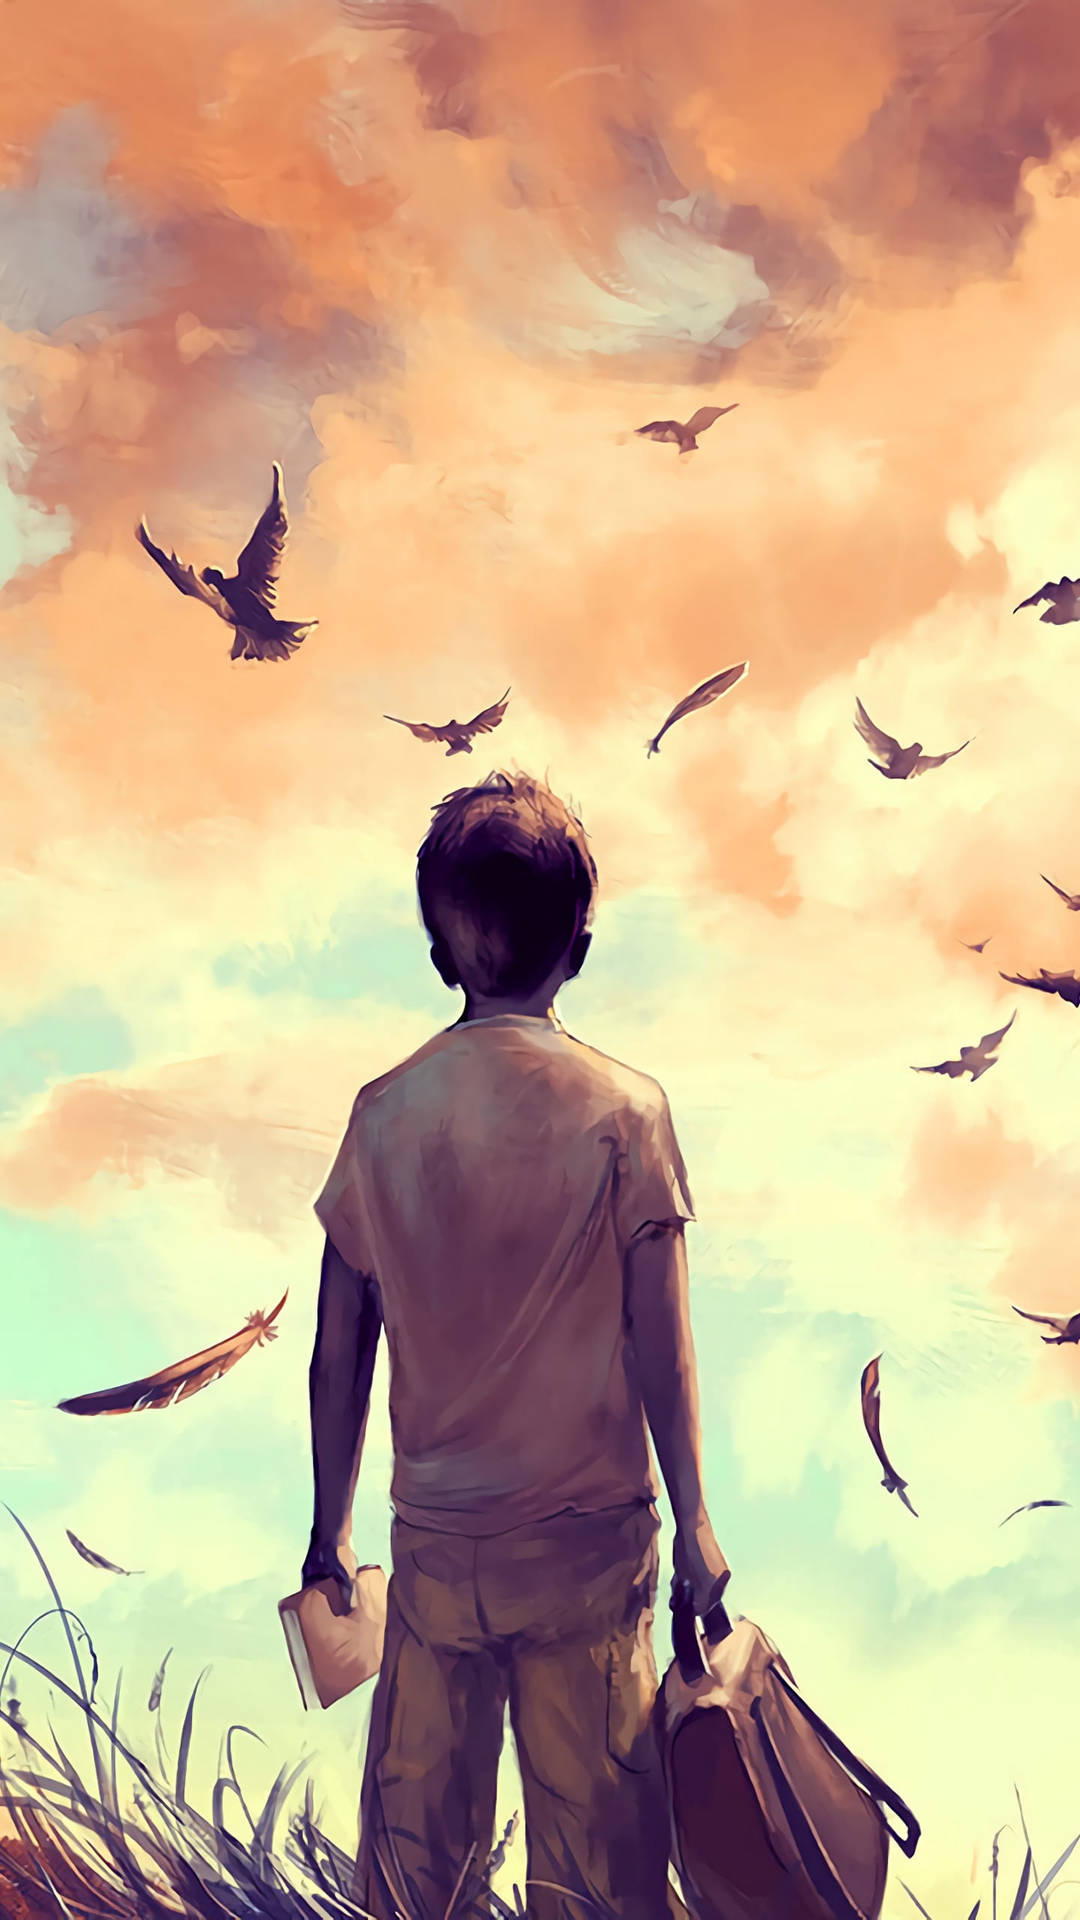 Relieving Sad Boy Cartoon Staring At Sunset Sky Background